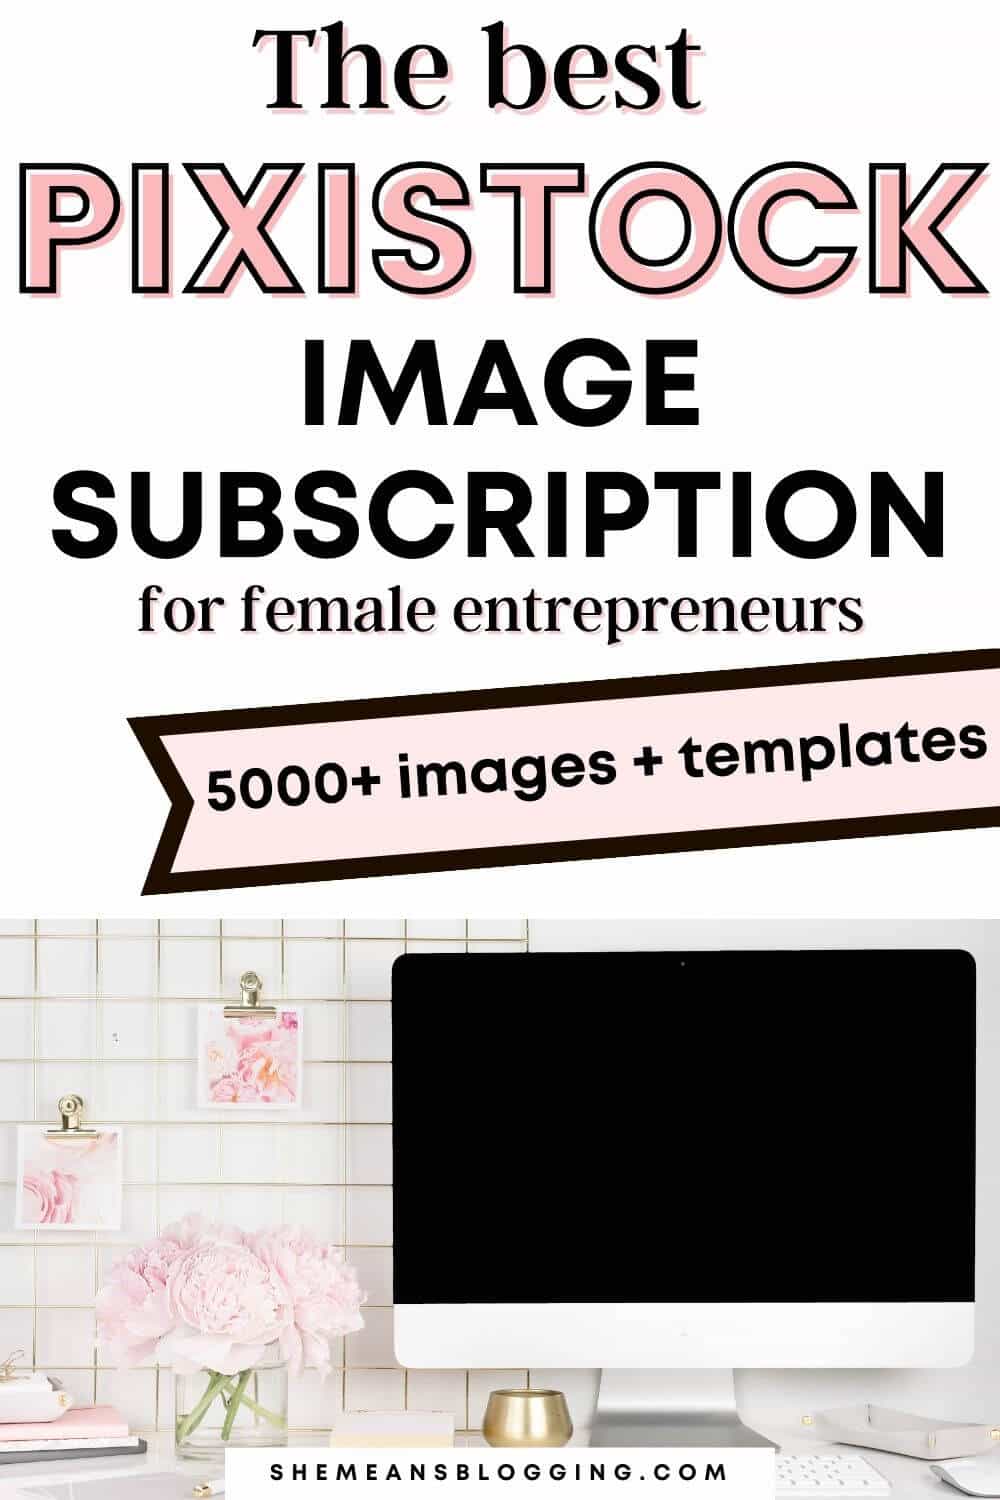 Looking for the best stock image subscription site? Pixistock image subscription is perfect for female entrepreneurs and bloggers! Get 5000+ stock images for lifestyle bloggers, entrepreneurs and female bloggers. Download hundreds of Canva templates, presets, instagram templates etc! Click to learn more about pixistock subscription review.